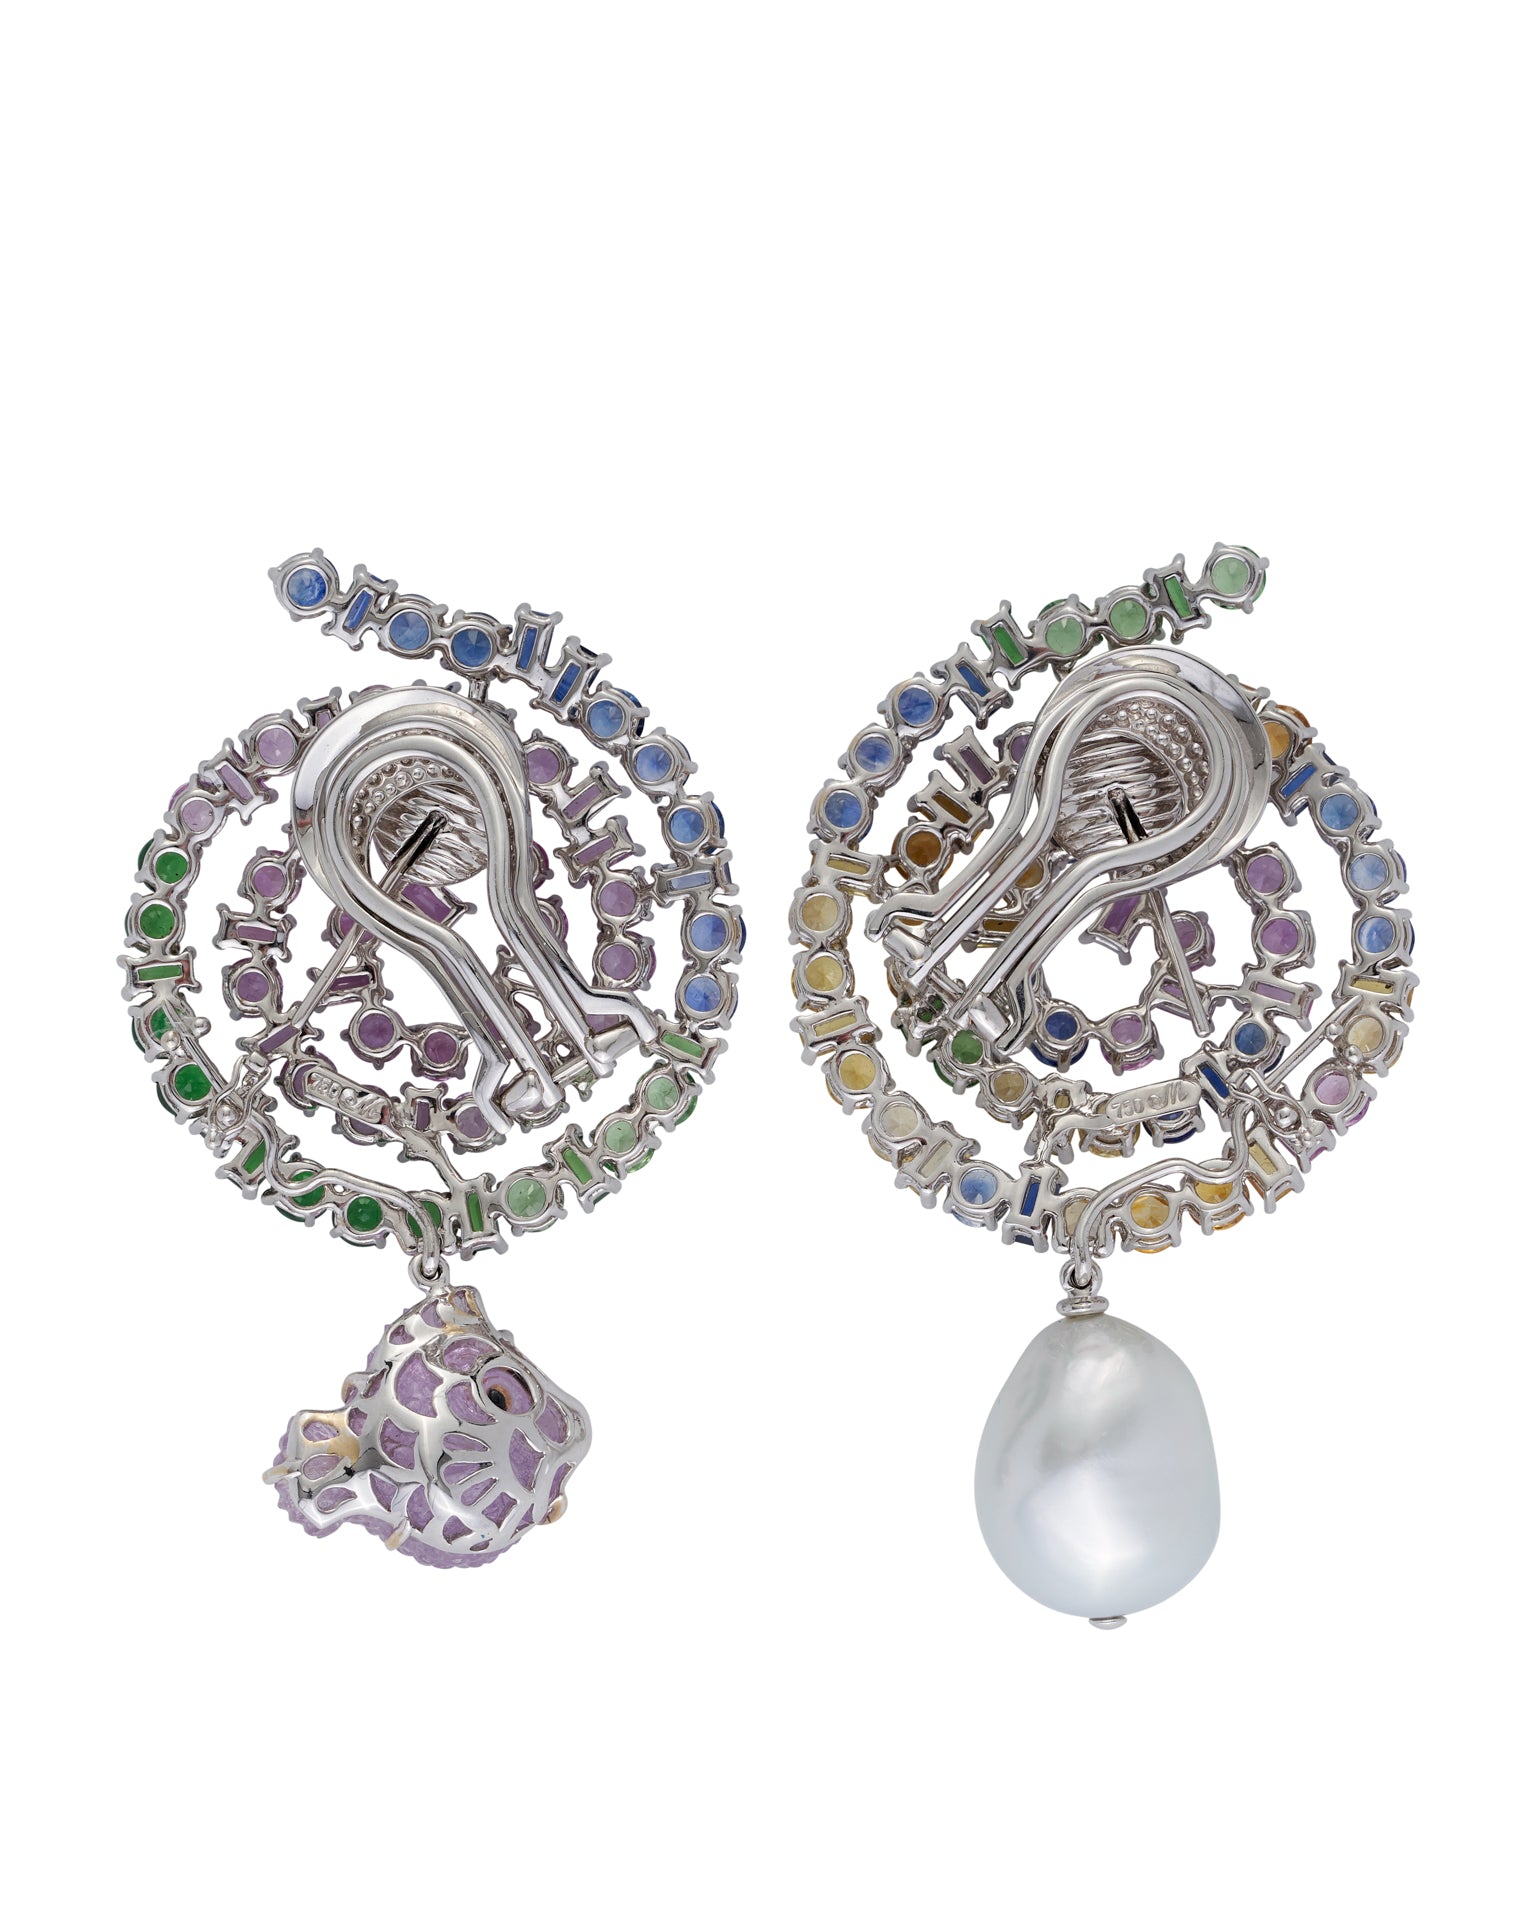 "Circle of Life" earrings with South Sea pearl and carved lavender tourmaline pendants set with tsavorites and pink, blue and yellow sapphires, crafted in 18 karat white gold.